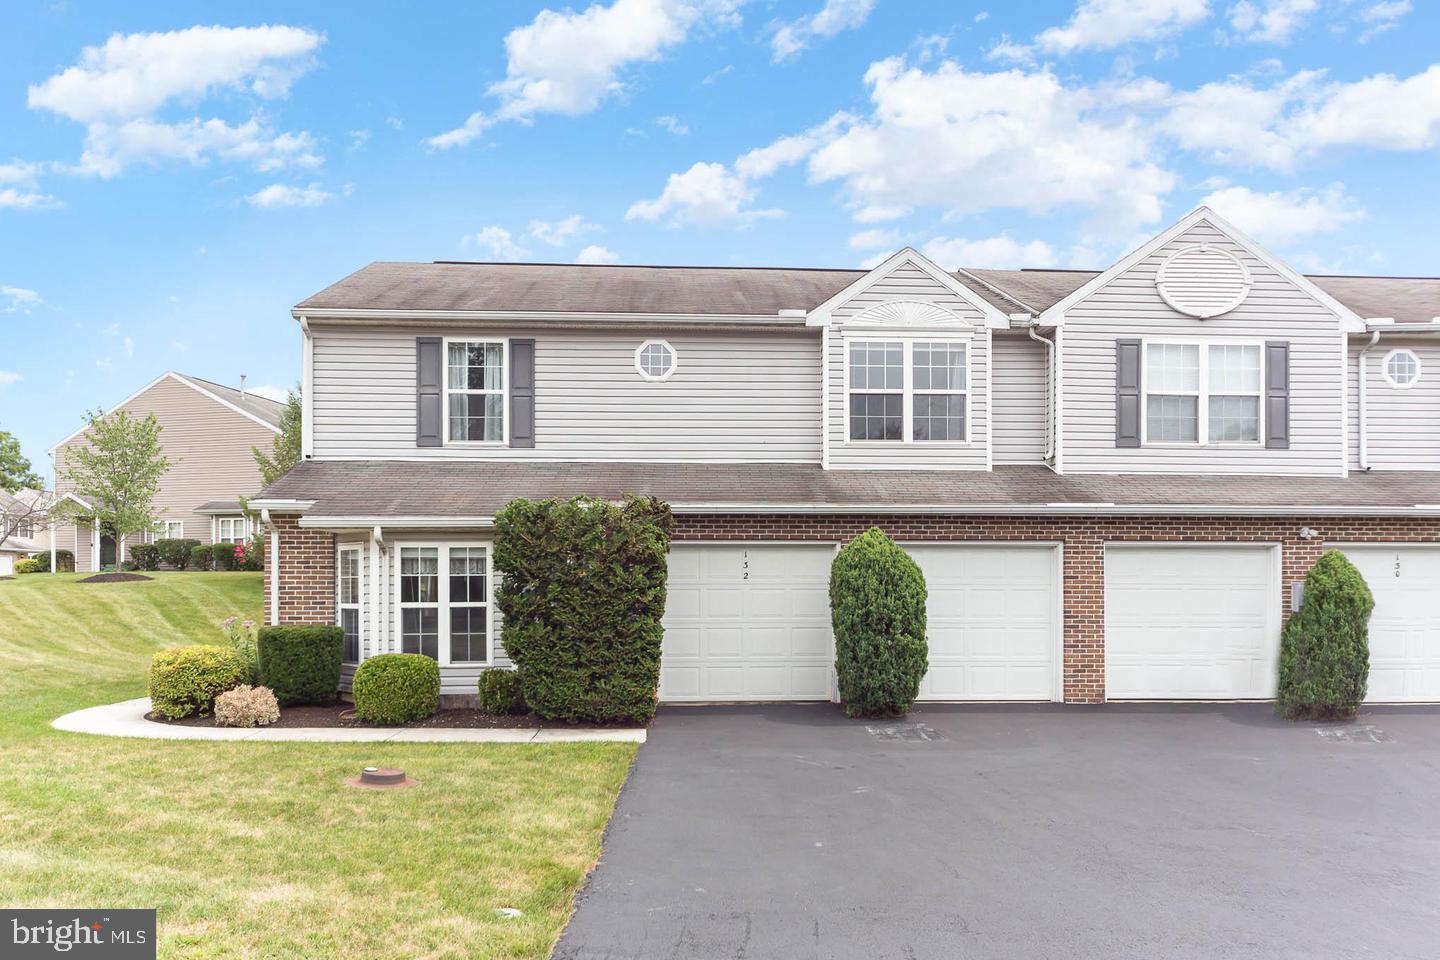 View Hummelstown, PA 17036 townhome